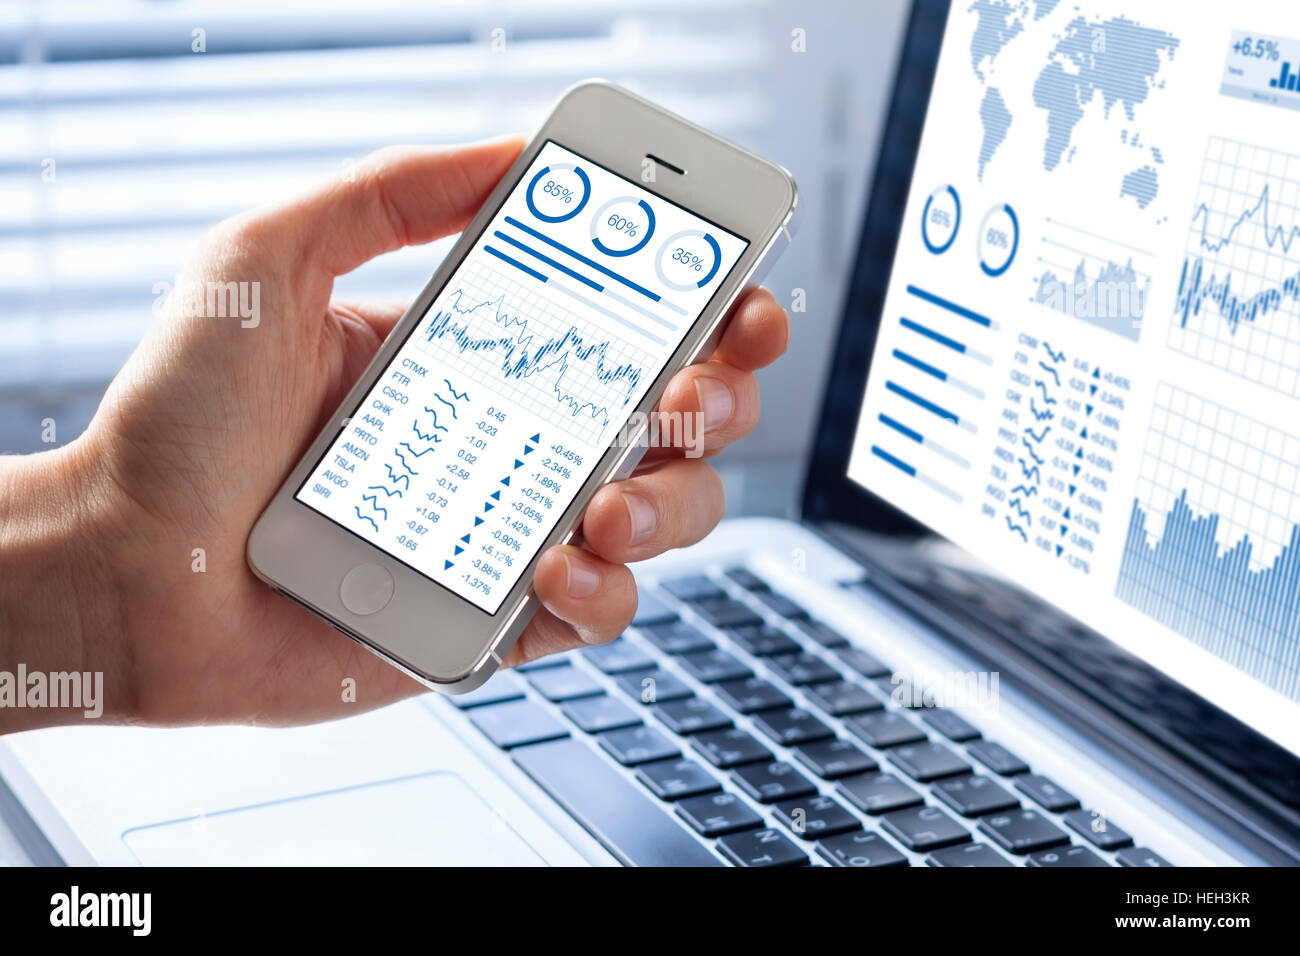 Investor analyzing stock market investments with financial dashboard, business intelligence (BI), and key performance indicators (KPI) on smartphone a Stock Photo